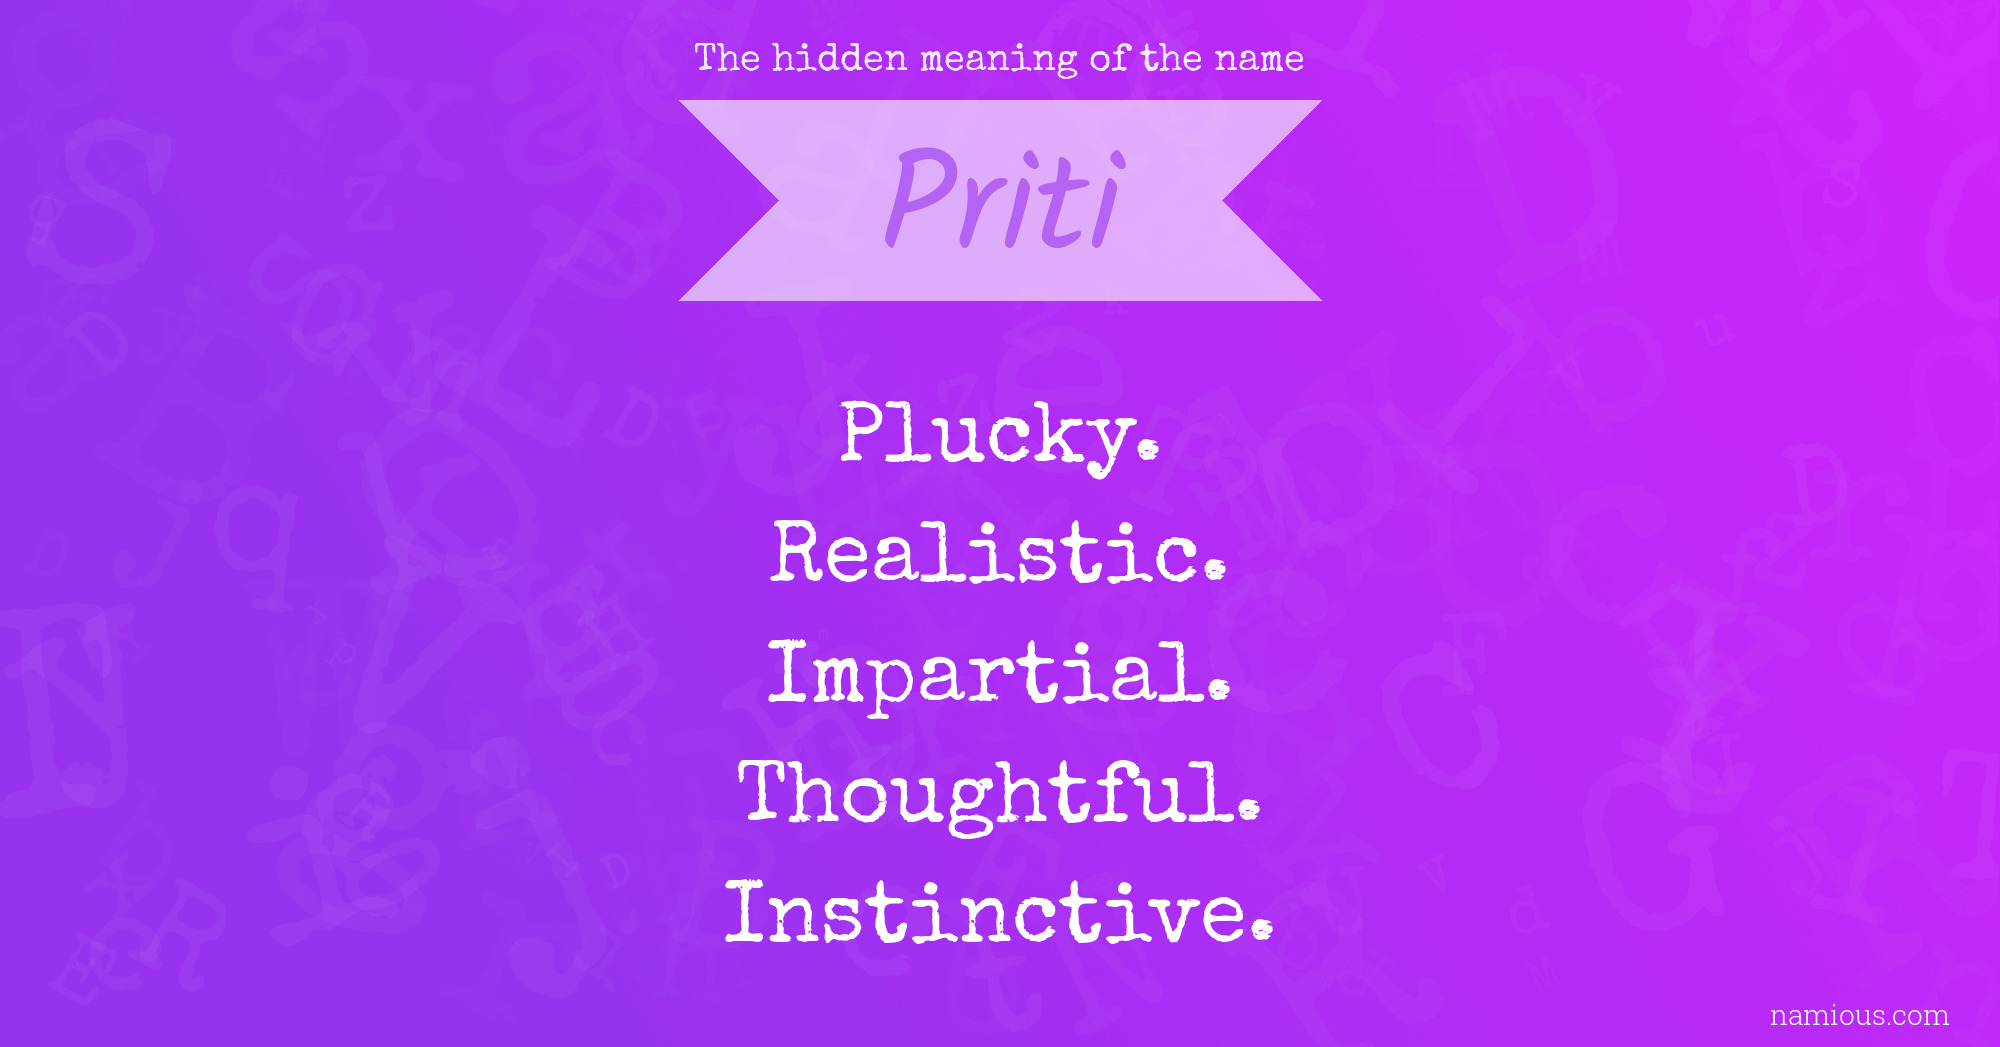 The hidden meaning of the name Priti